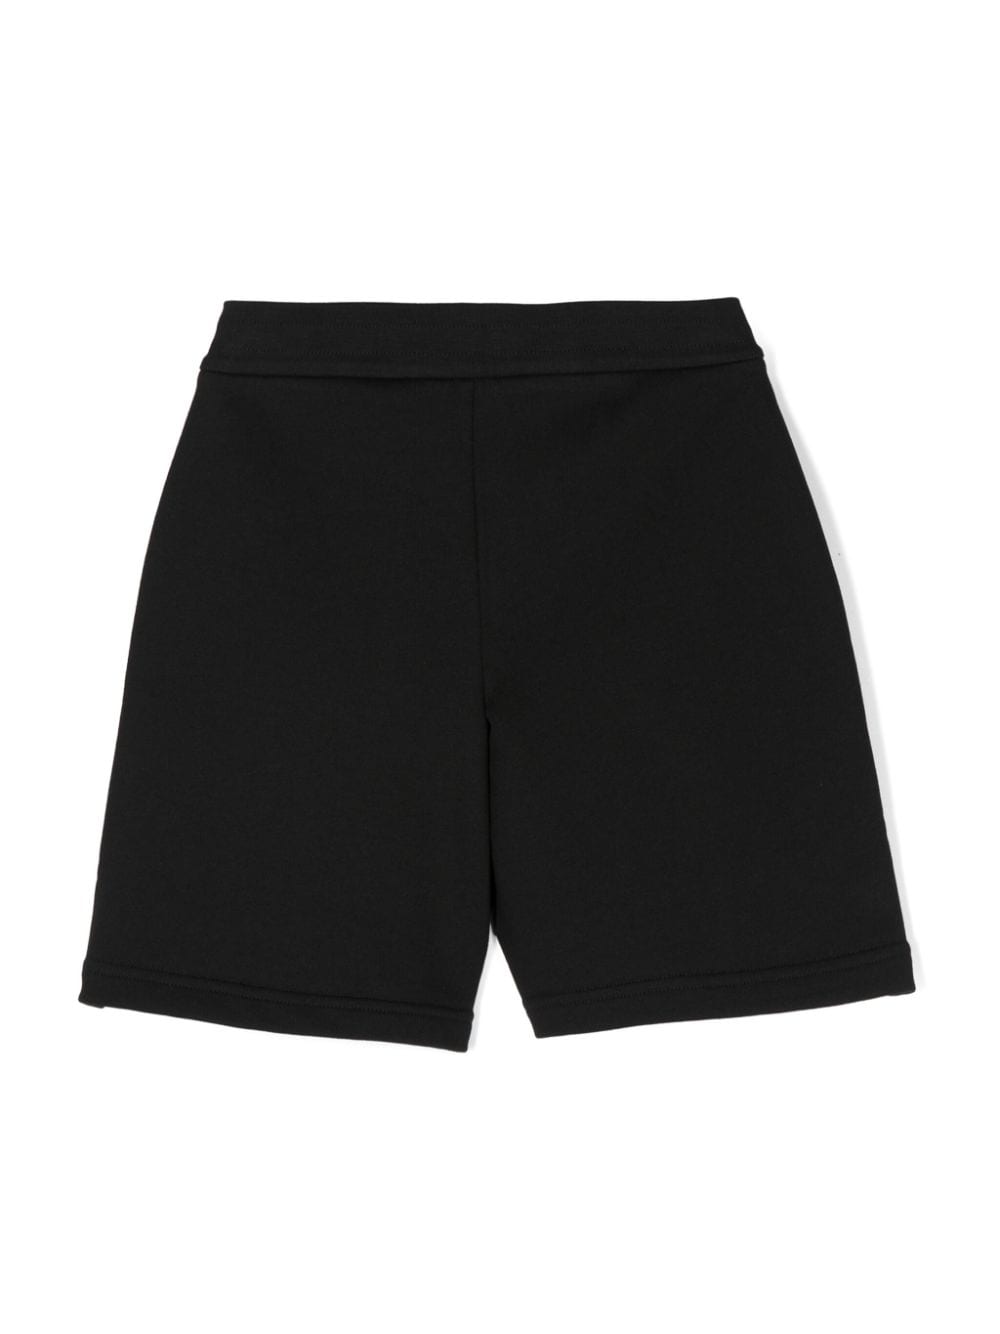 Black shorts for boys with logo